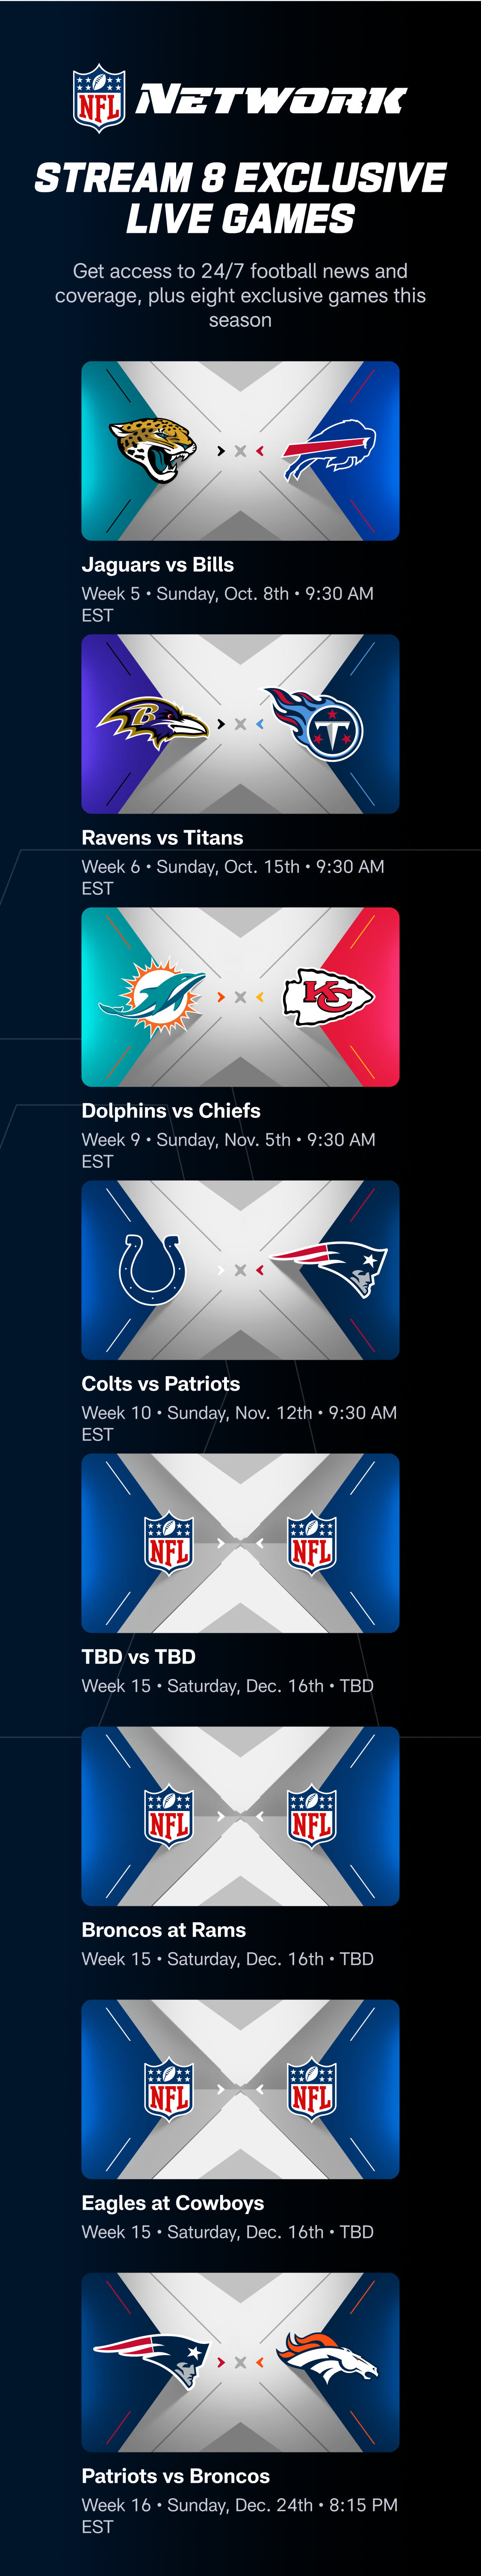 can i watch the dallas game on my phone